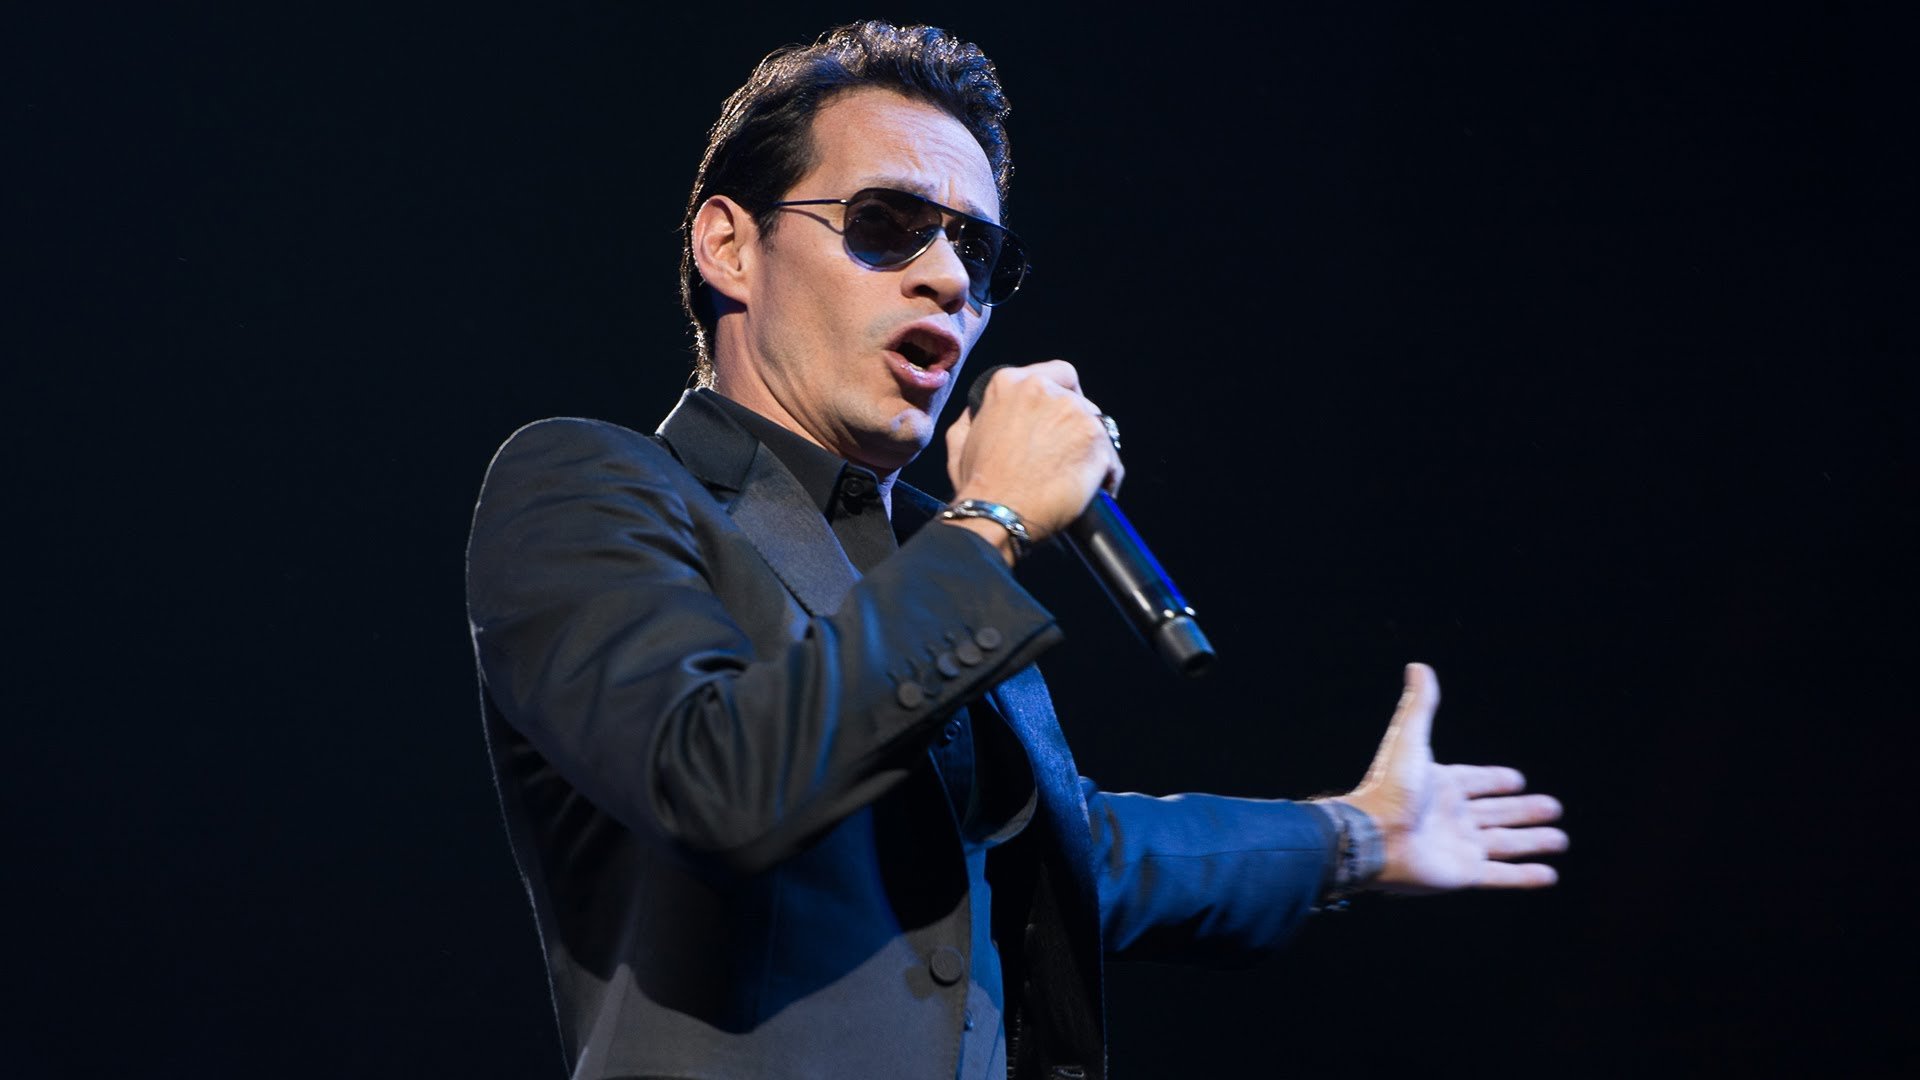 Marc Anthony Performing Wallpaper 62657 1920x1080px 1920x1080